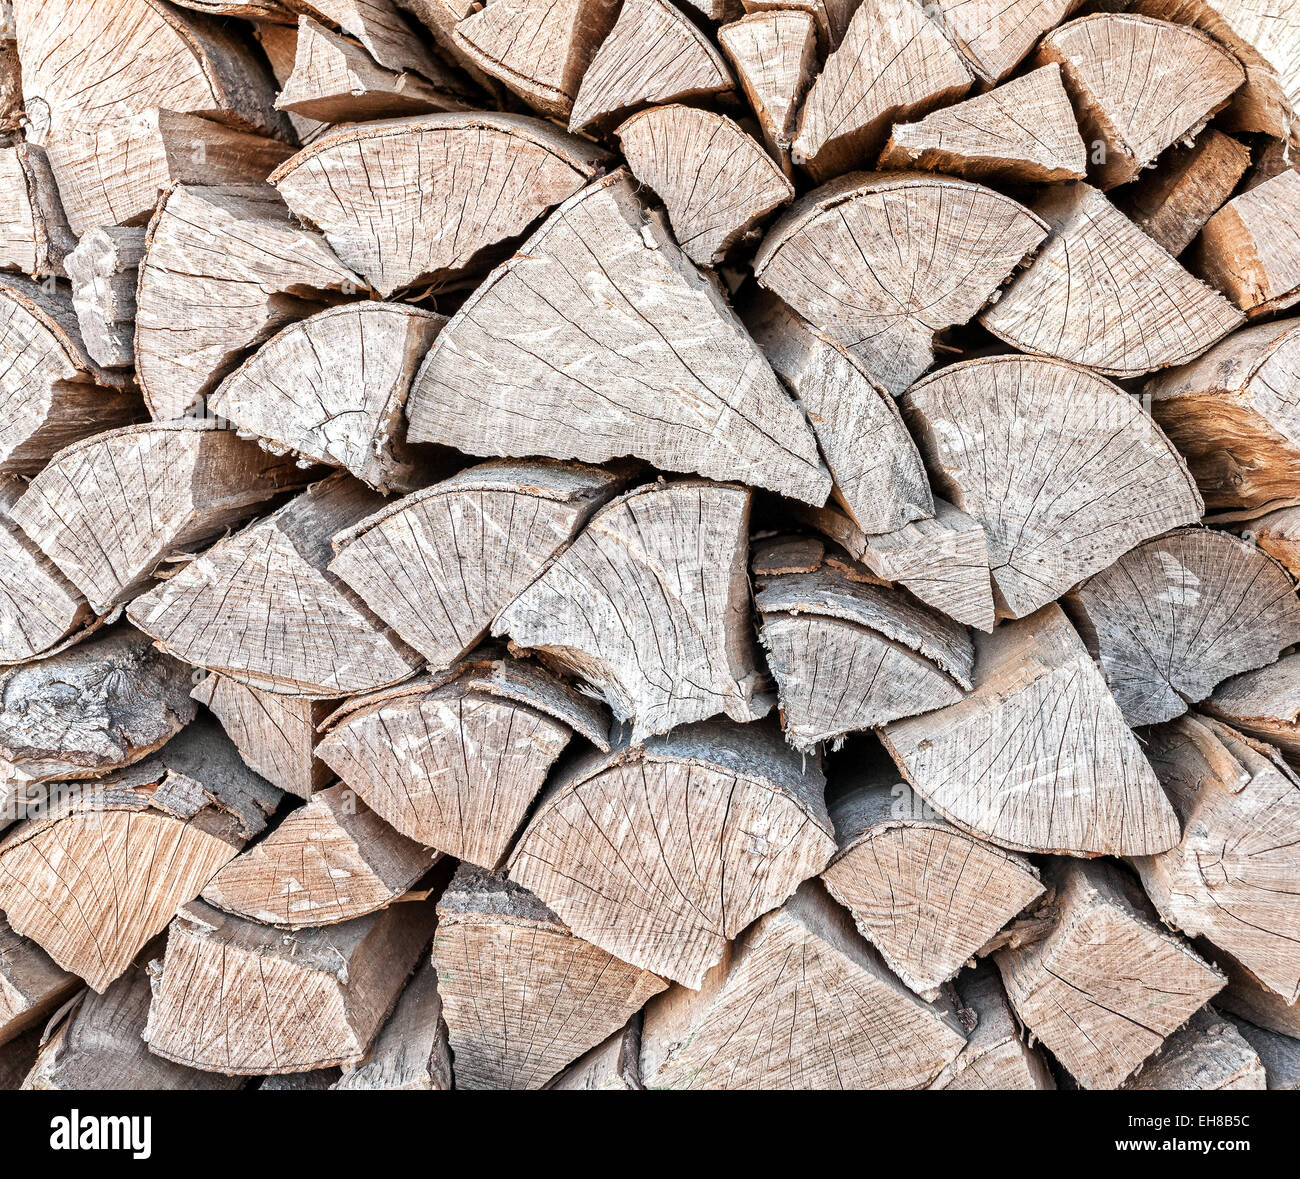 Background or texture made of firewood. Stock Photo